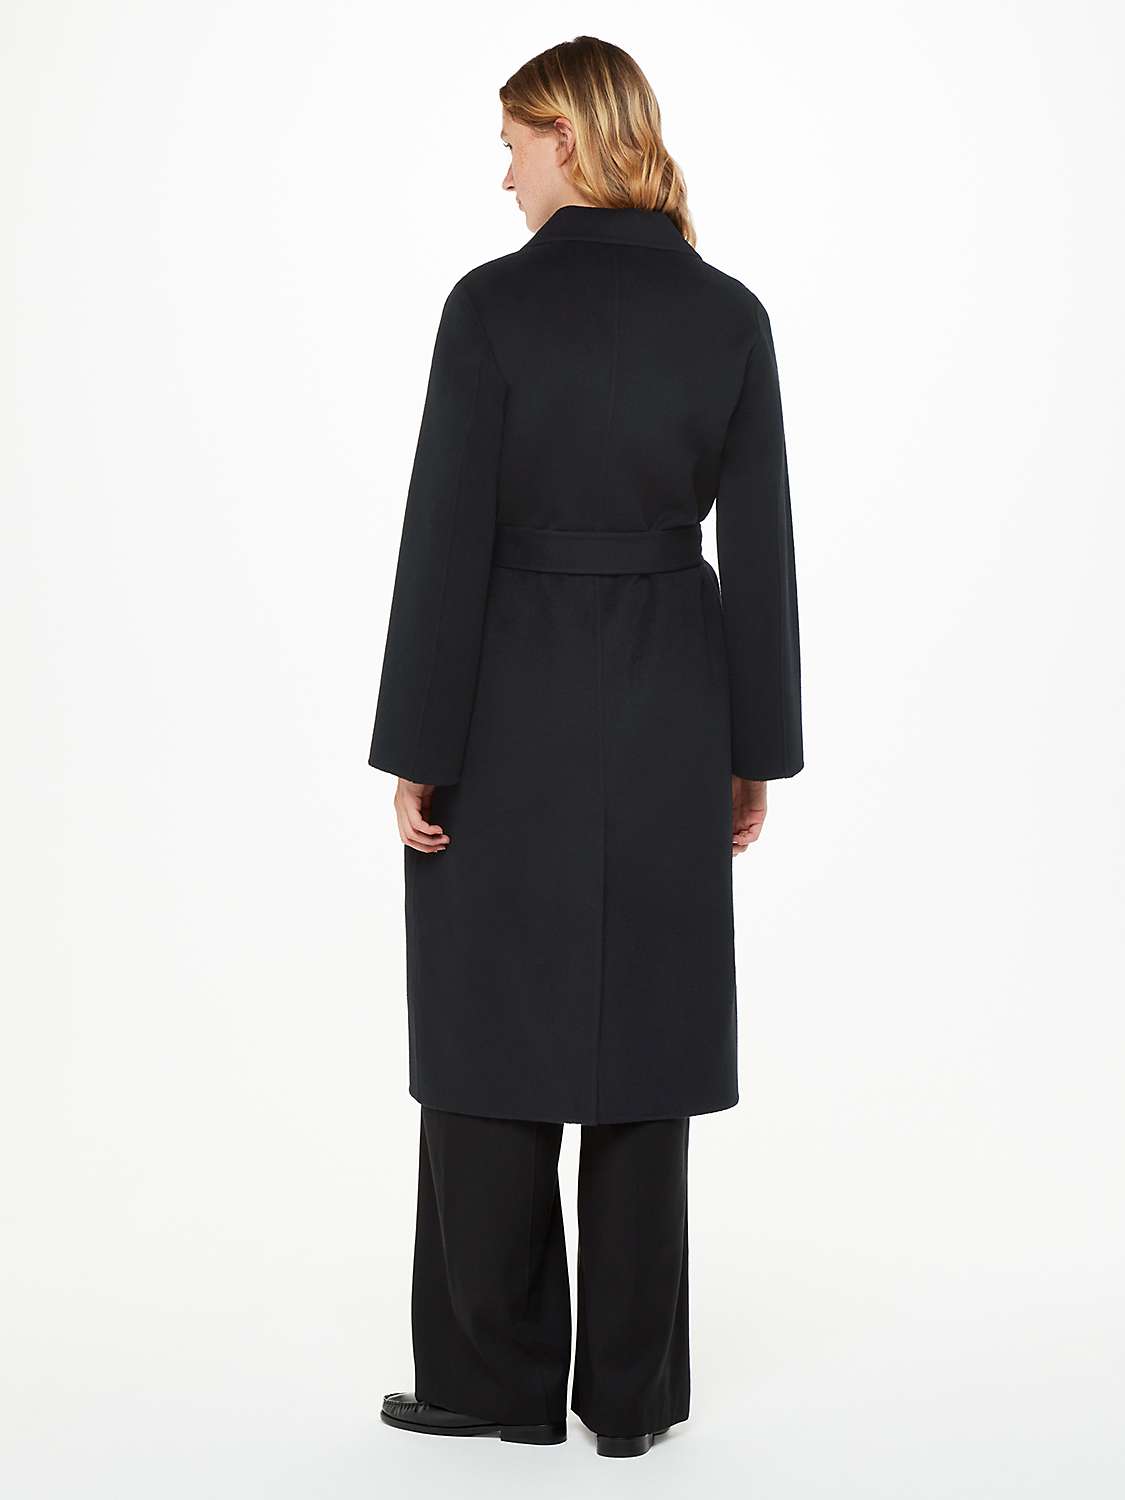 Buy Whistles Nell Belted Doubled Faced Coat, Black Online at johnlewis.com